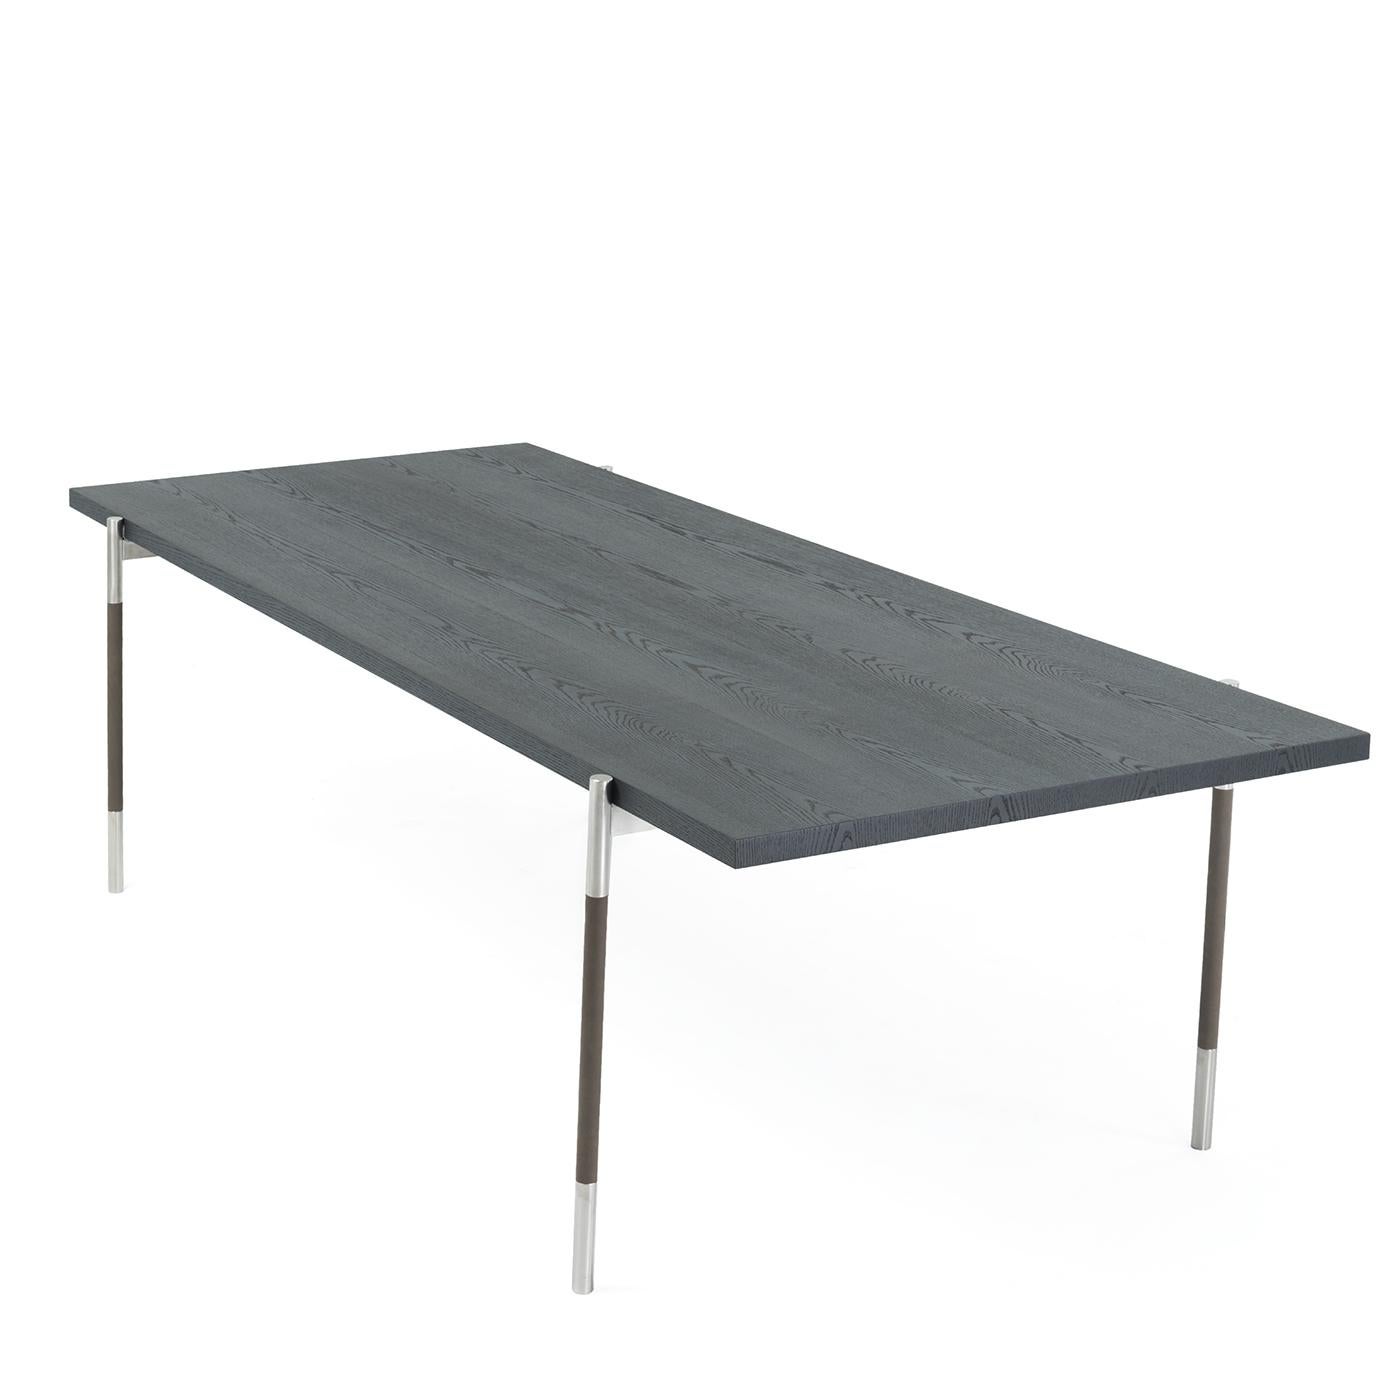 Respiro Table with Oak Top by Michael Schoeller In New Condition For Sale In Milan, IT